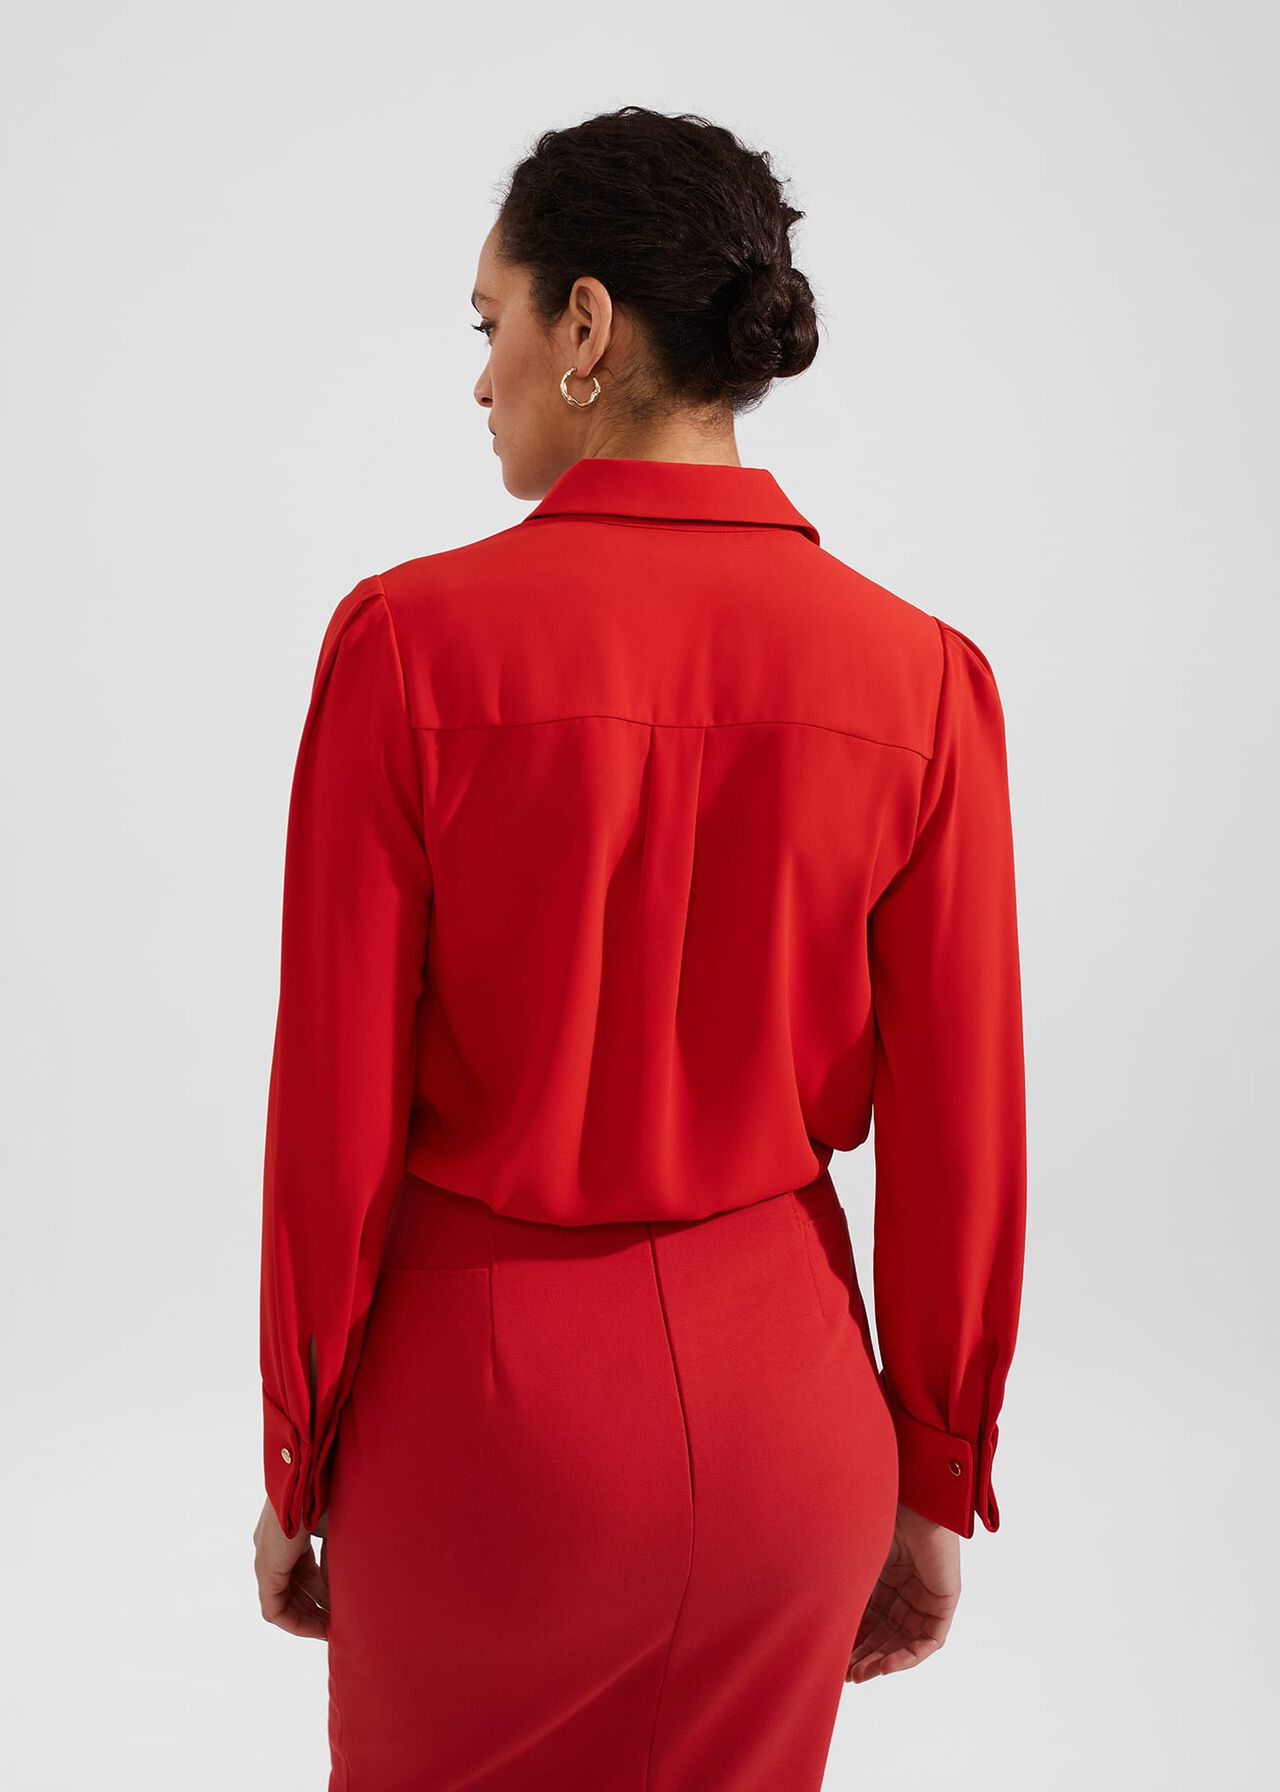 Verity Blouse, Red, hi-res